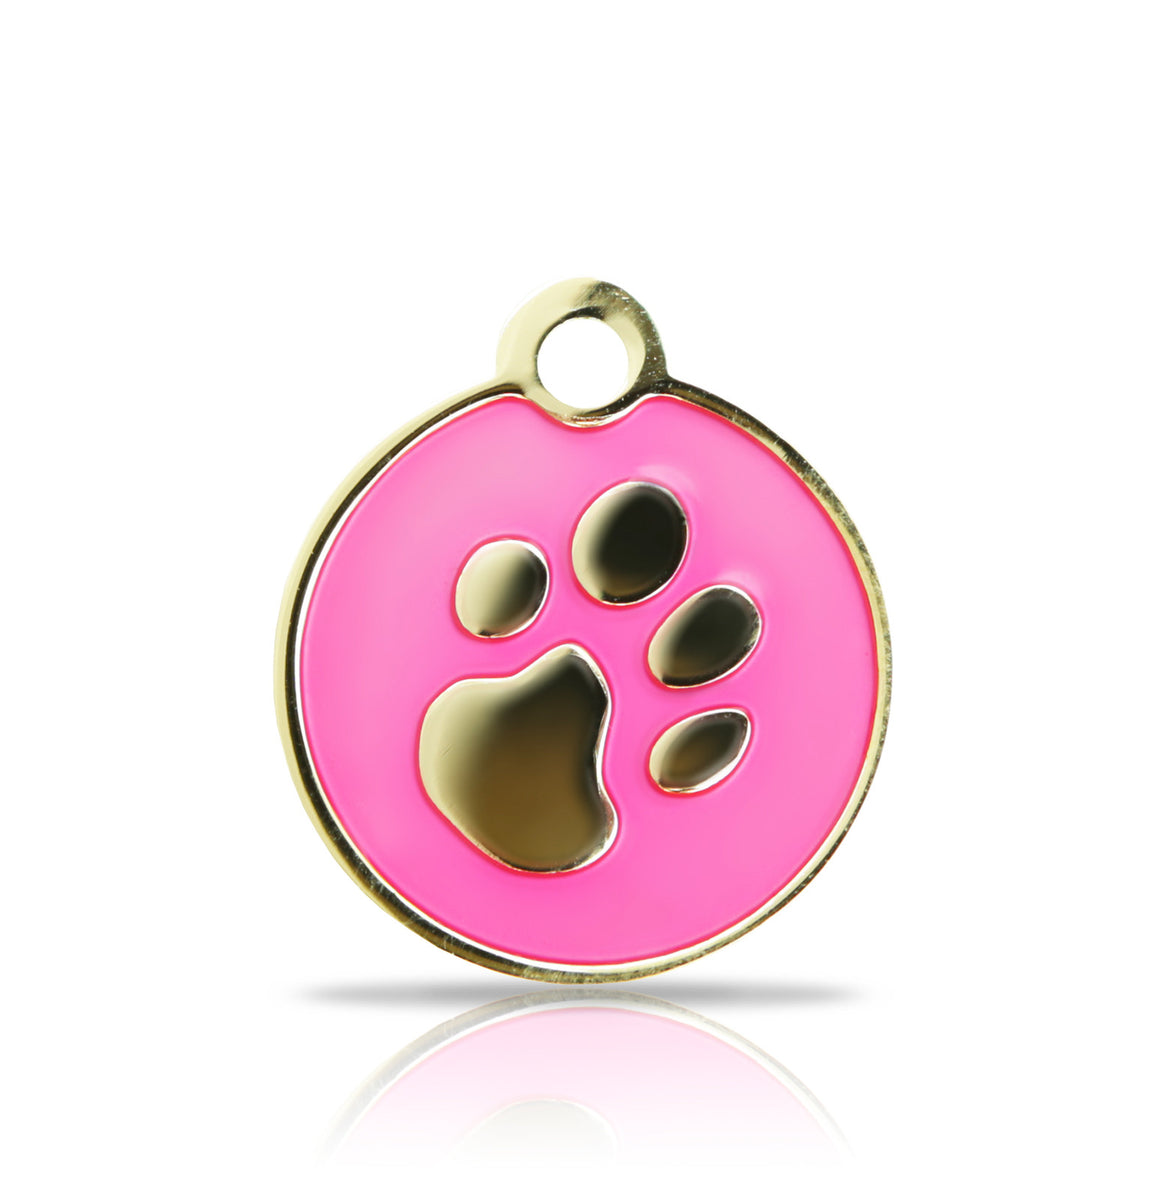 TaggIT Elegance Small Disc Pink & Gold Paw Print Tag